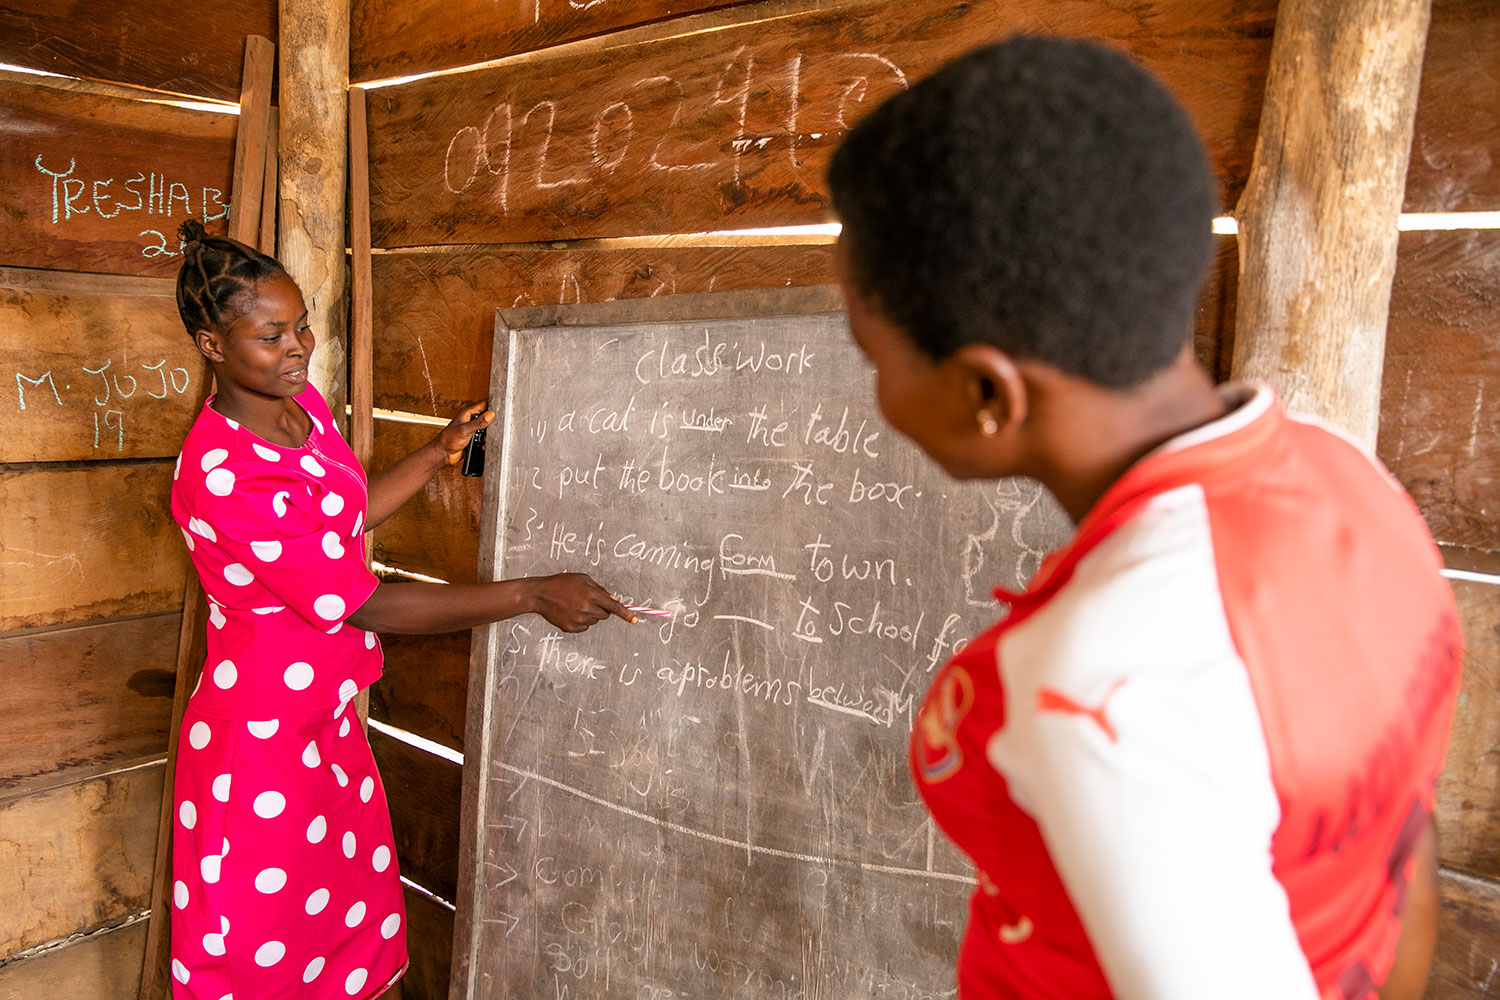 A teacher writes on a chalkboard as a young woman looks on